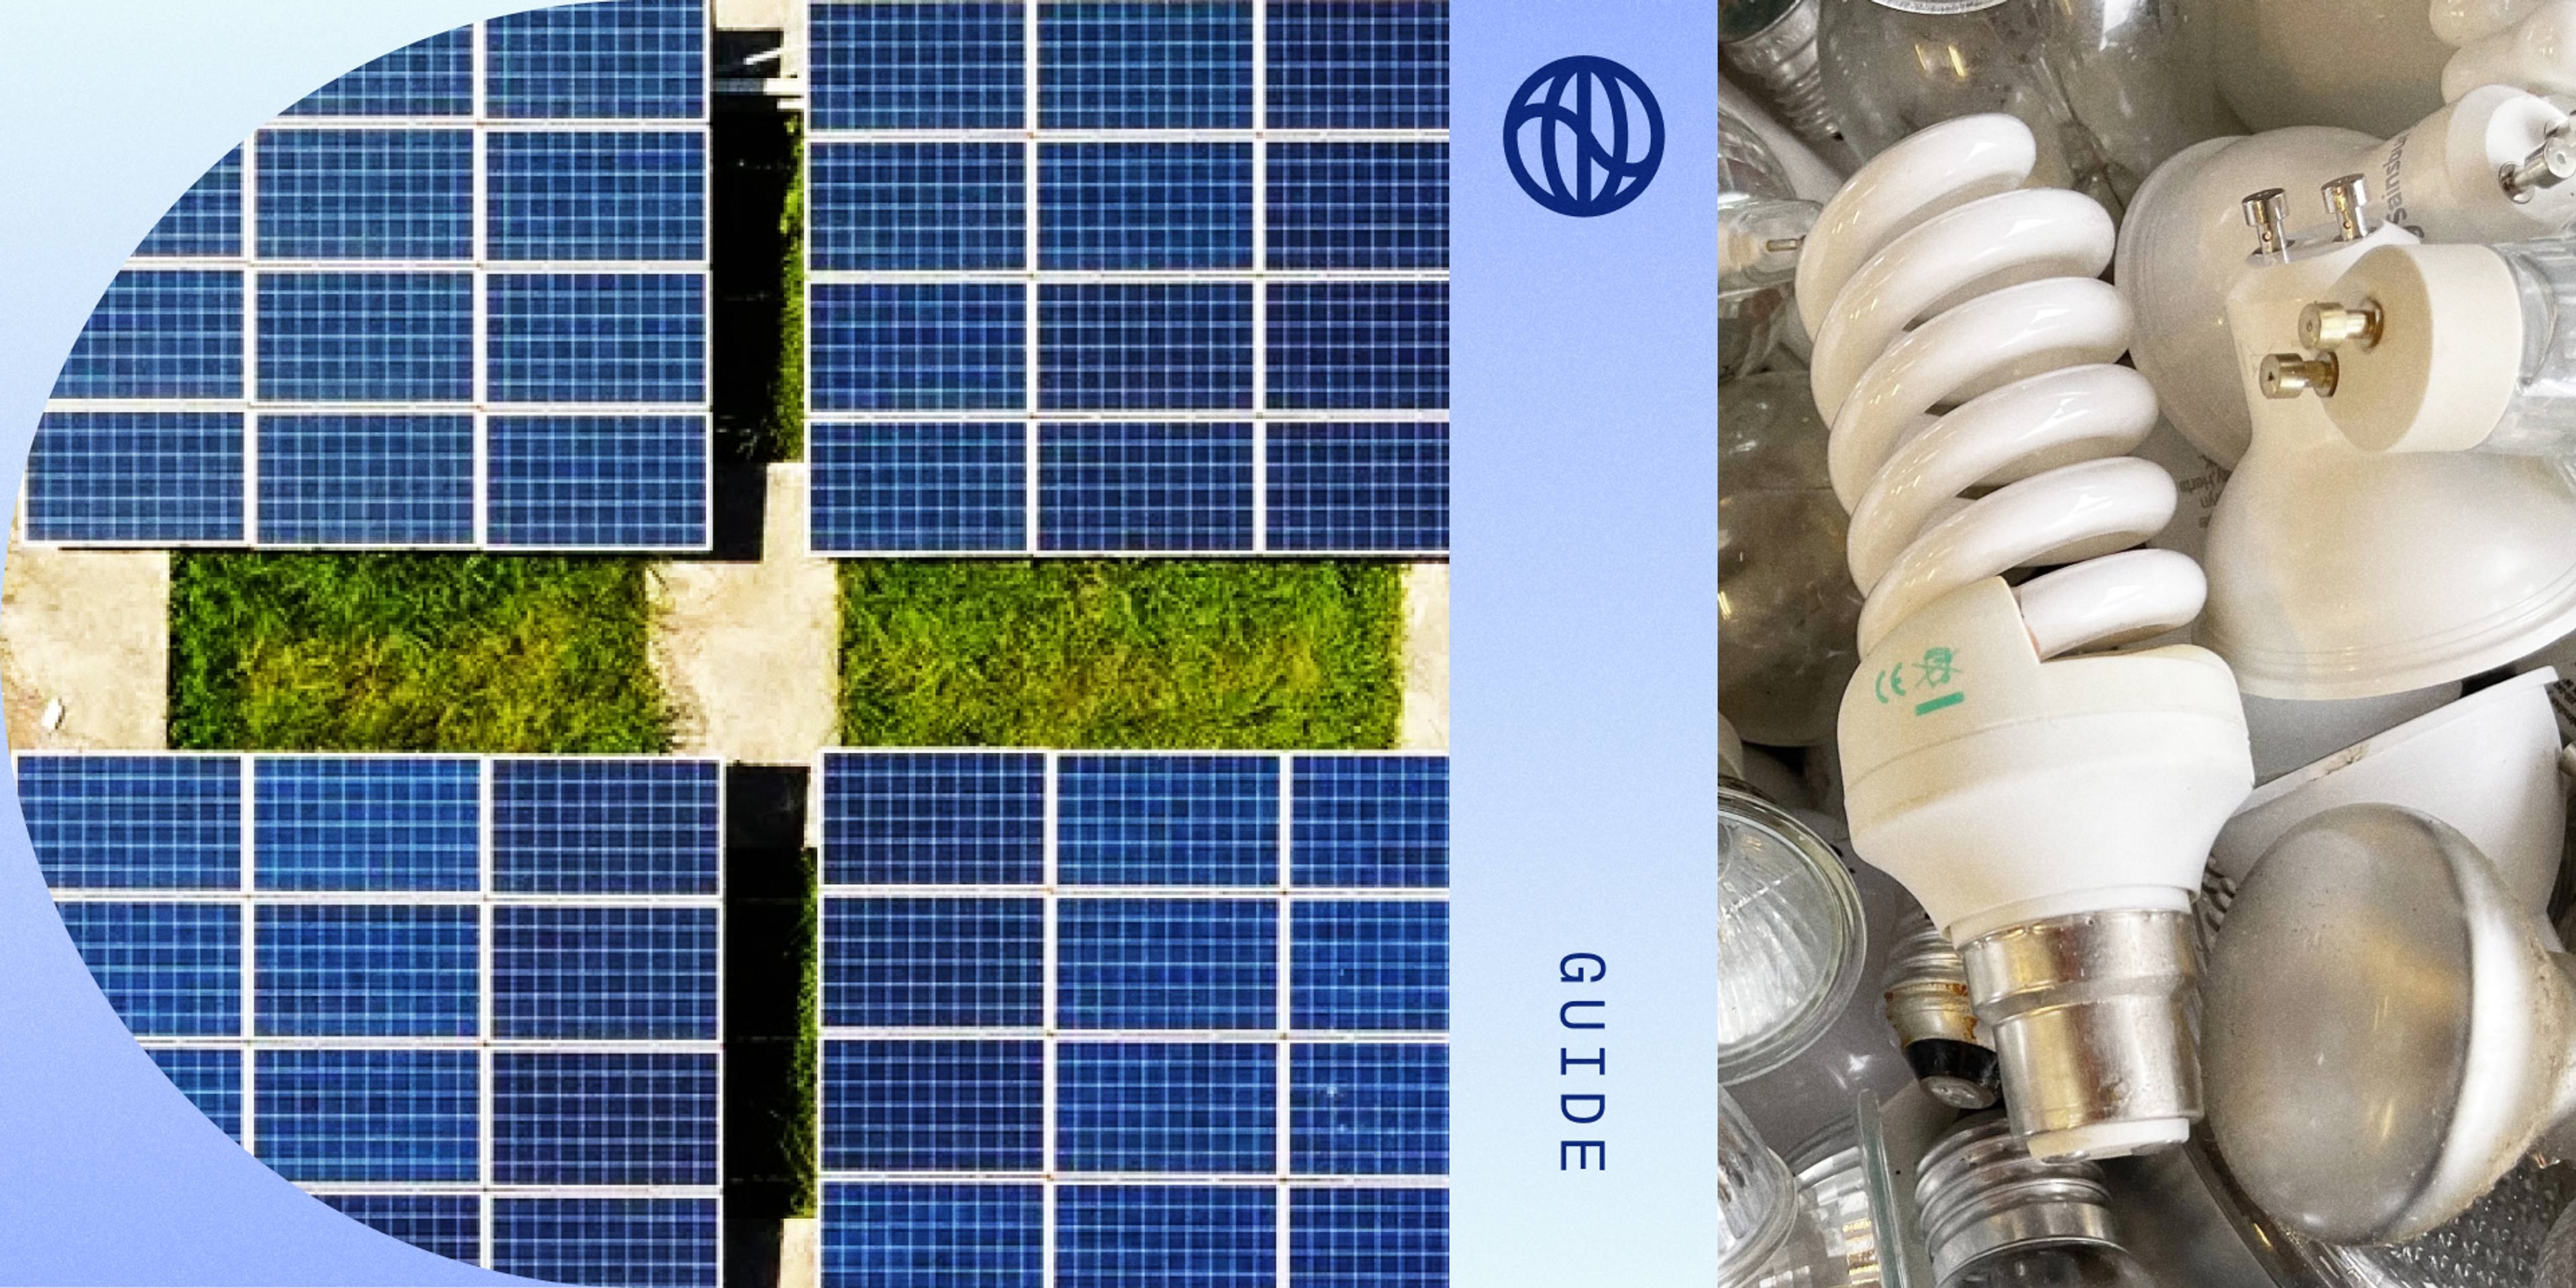 A collage showing an aerial array of solar panels on a sunny day on a grassy field, paired with a messy pile of used halogen and fluorescent light bulbs